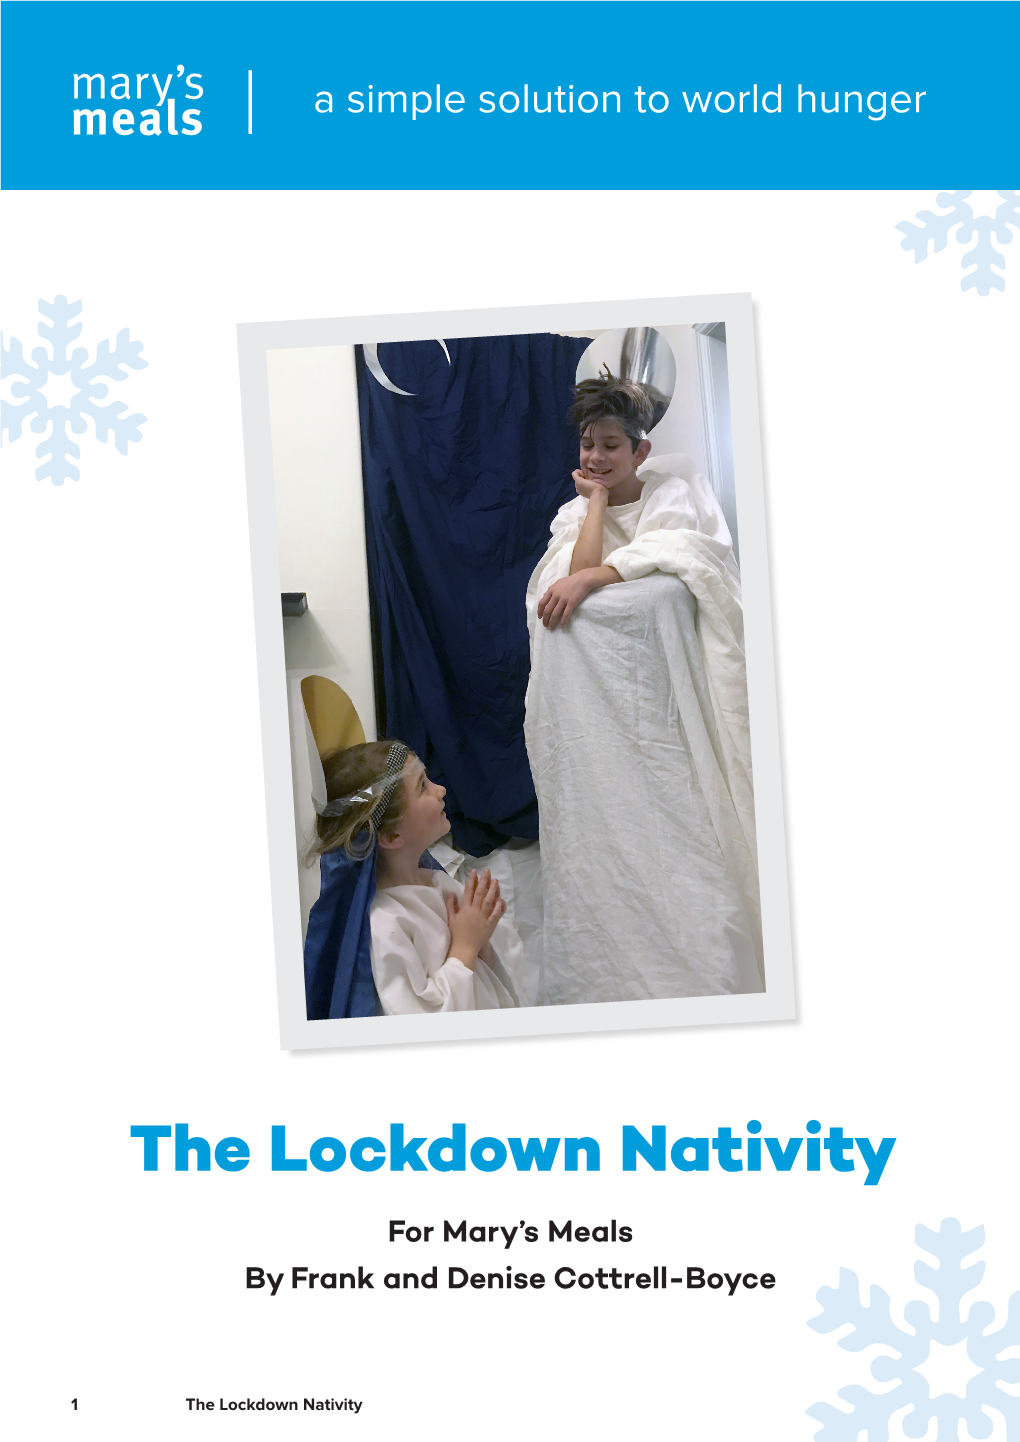 The Lockdown Nativity for Mary’S Meals by Frank and Denise Cottrell-Boyce